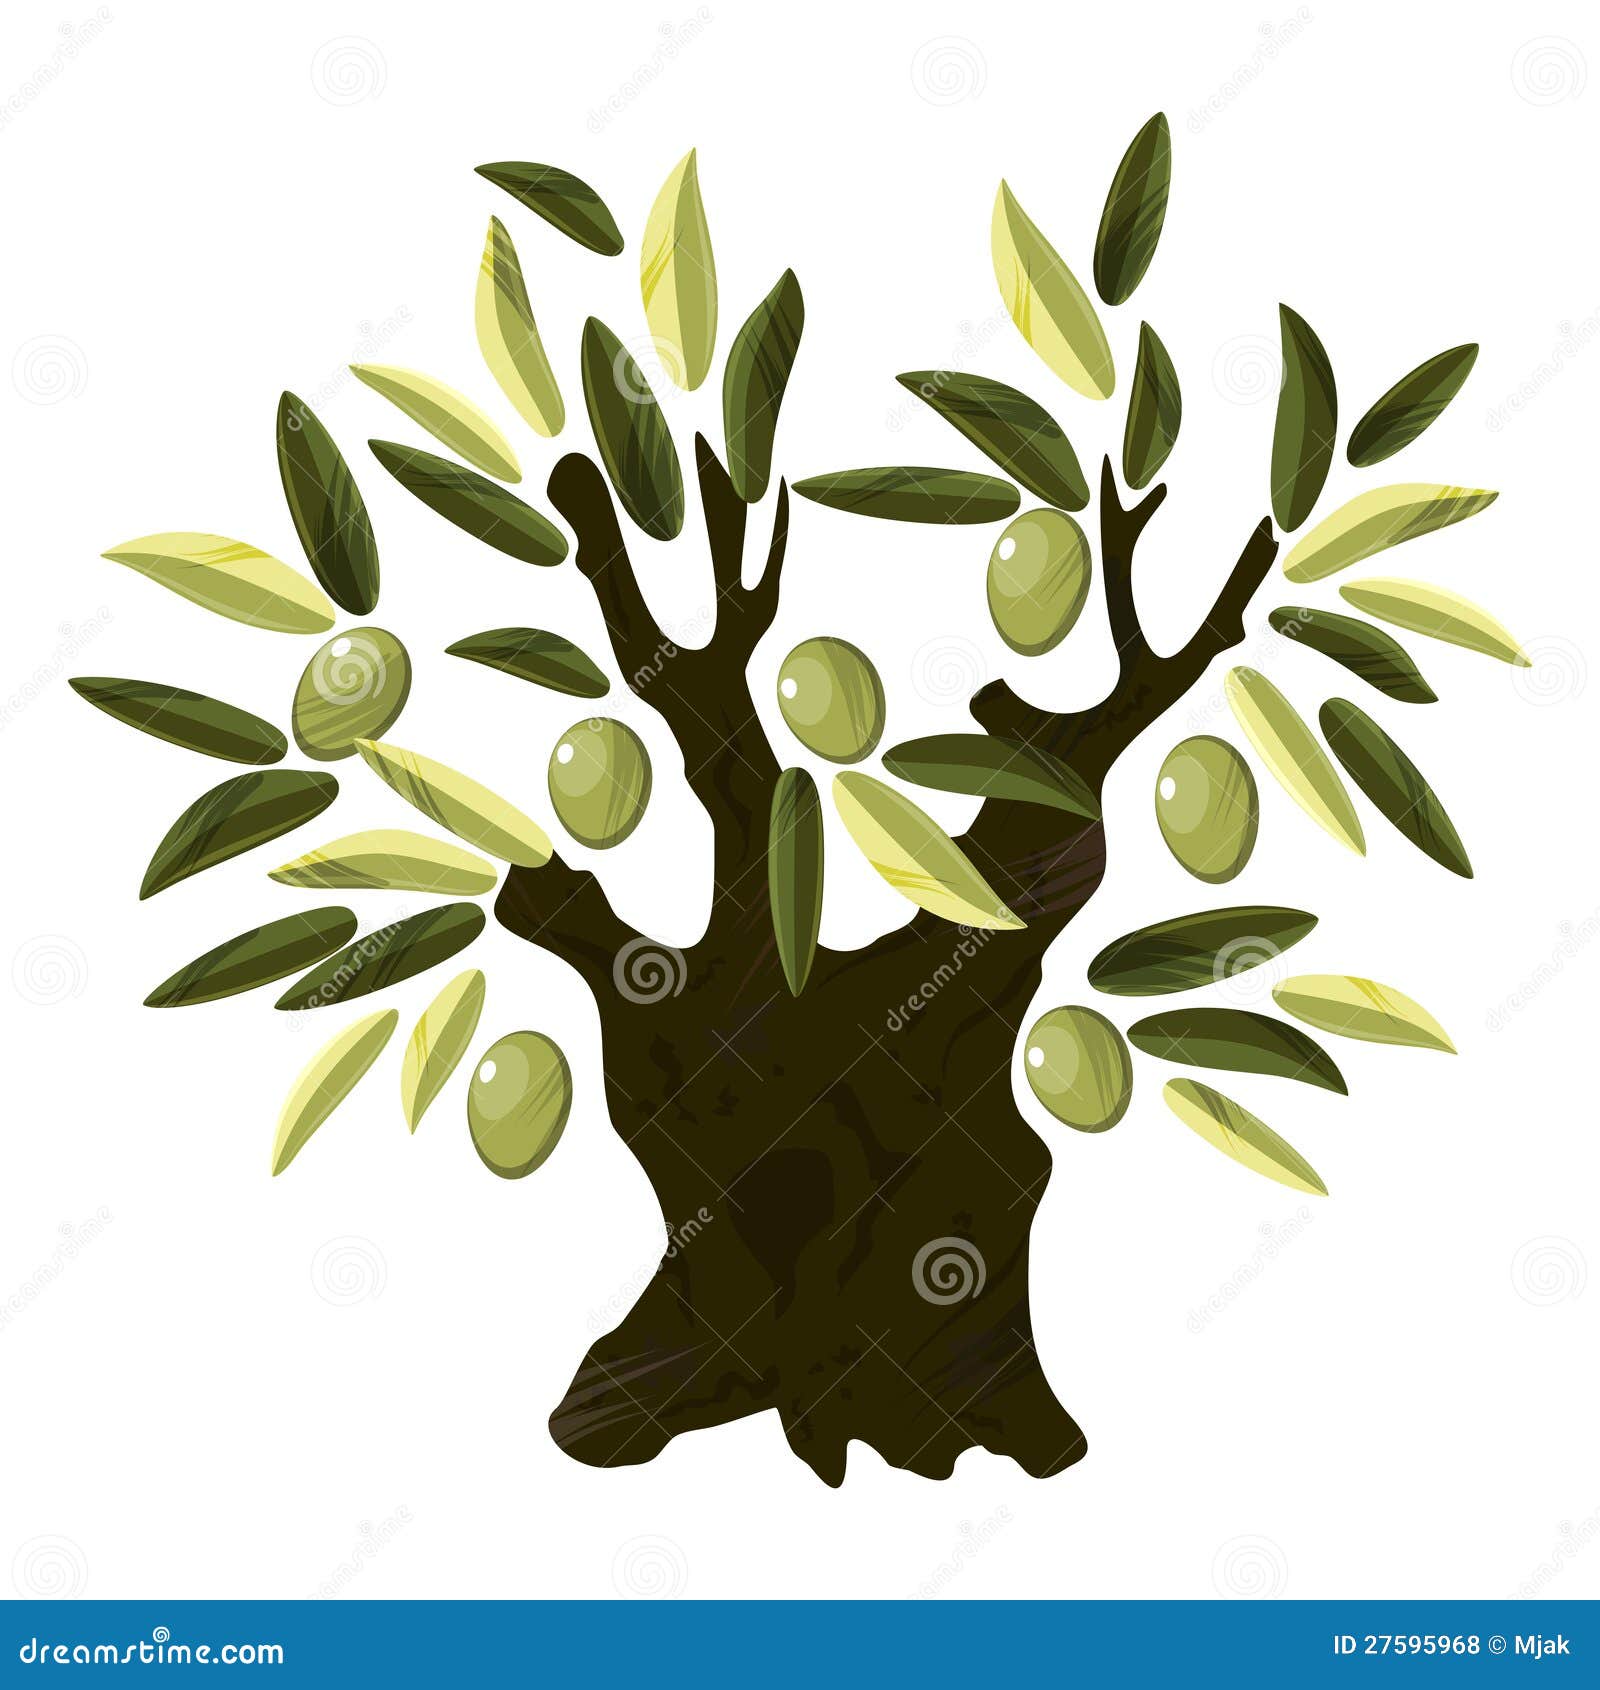 olive tree clip art images - photo #27